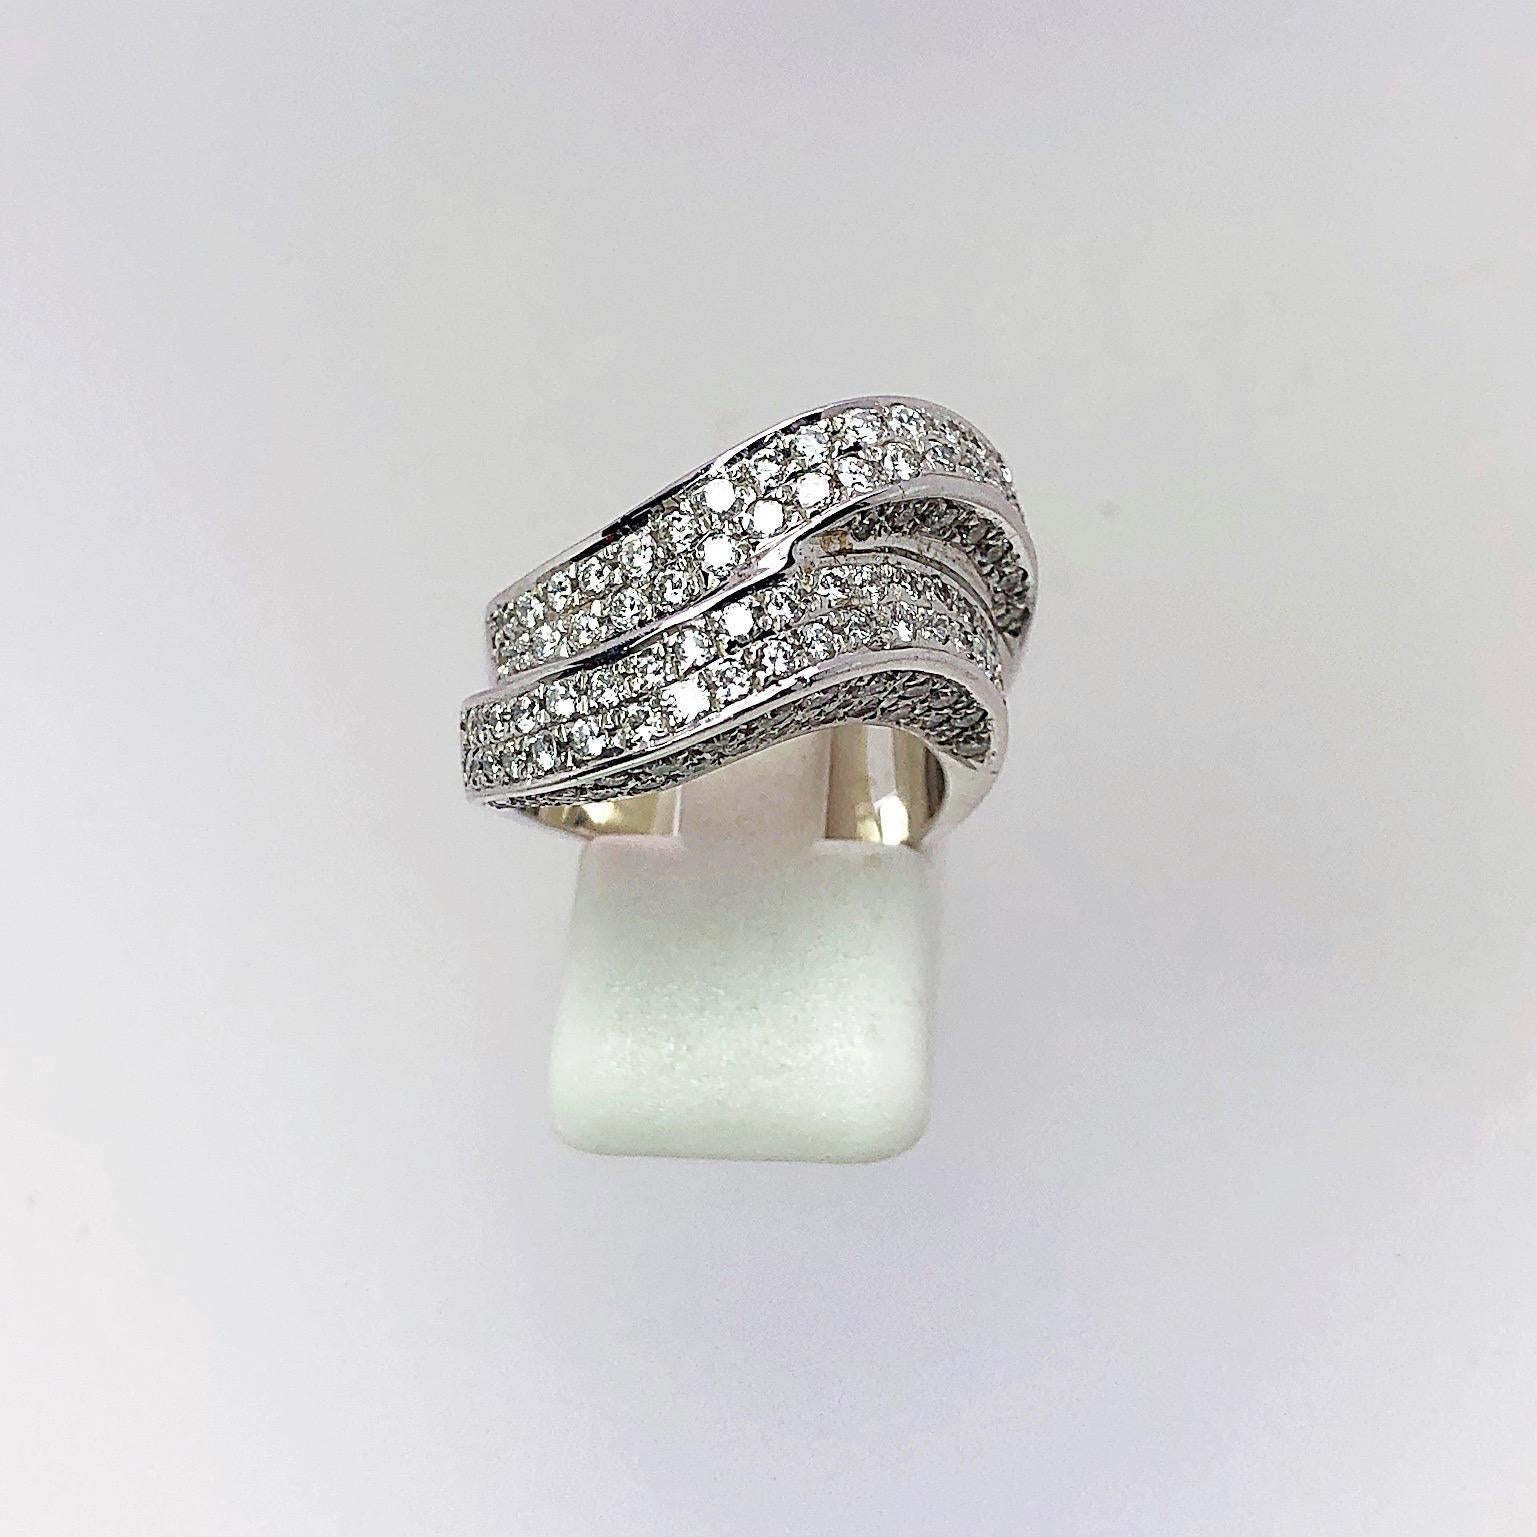 This 18 karat white gold double wave ring is pave set with round brilliant Diamonds. The beauty of this ring is that the Diamonds are set on the top and on all sides so that any way the hand turns you always see the Diamonds!!
Size 6.25  sizing